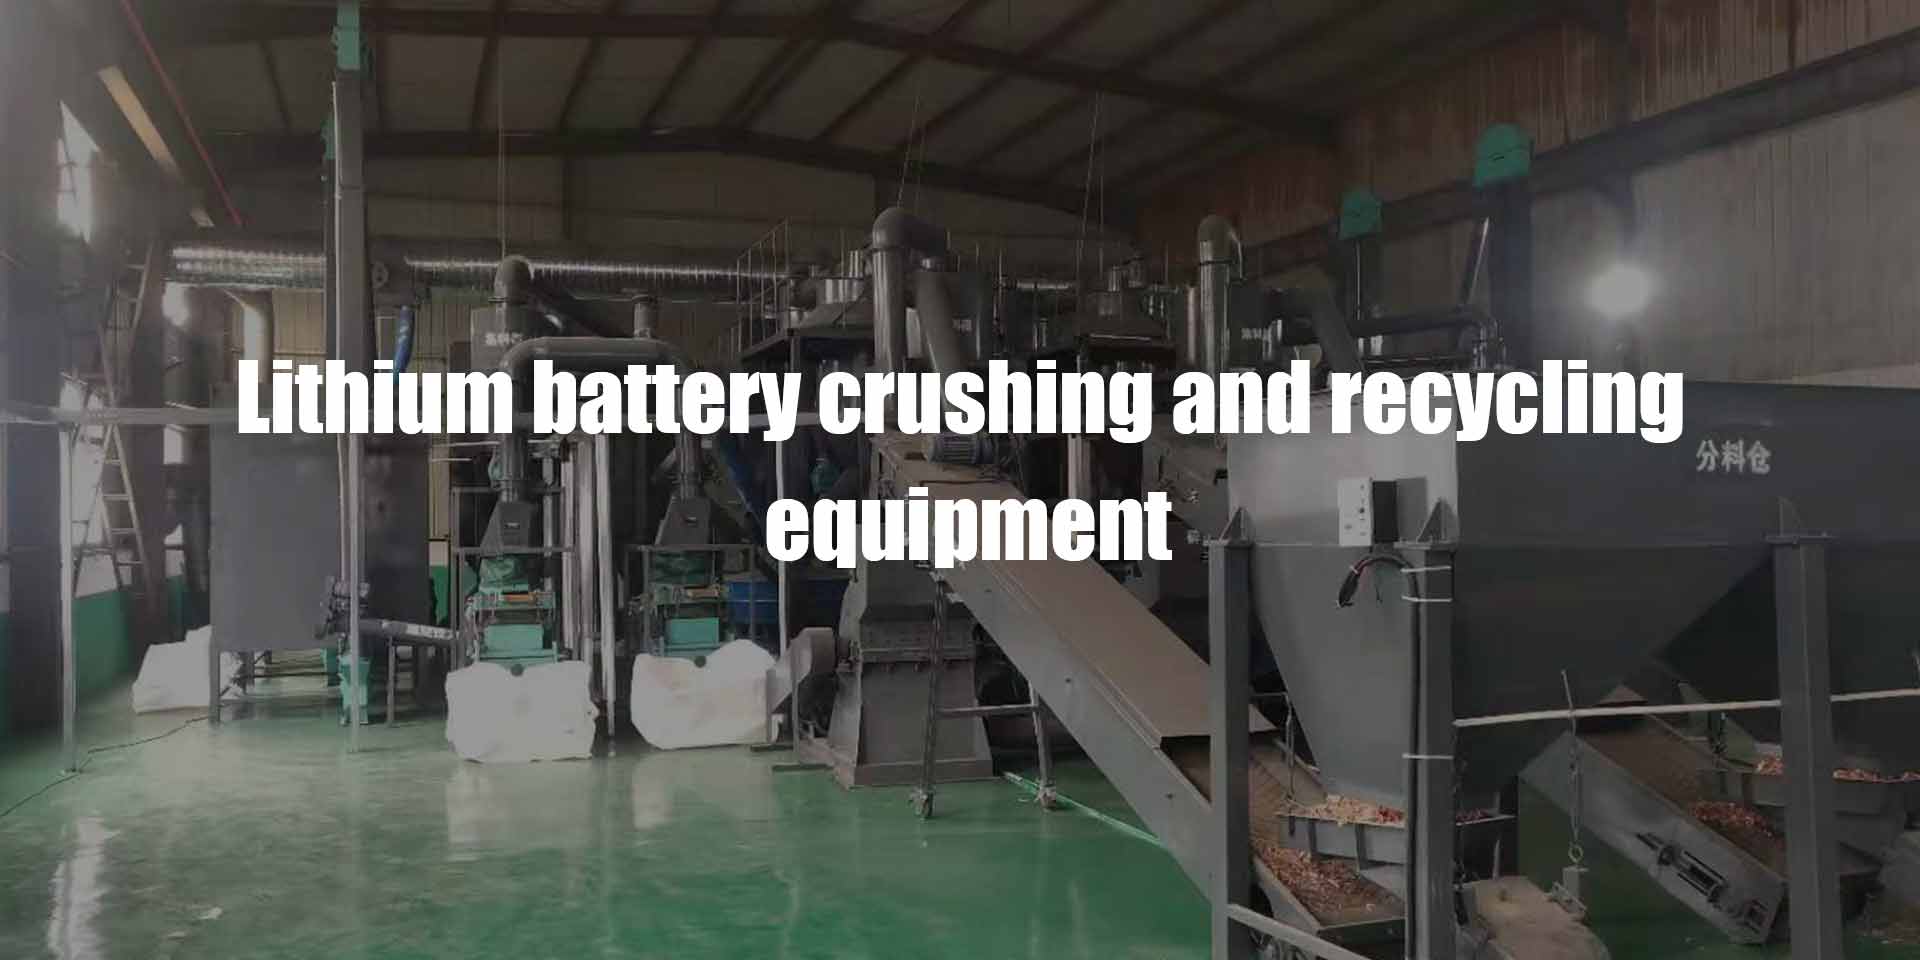 Lithium battery crushing and recycling equipment